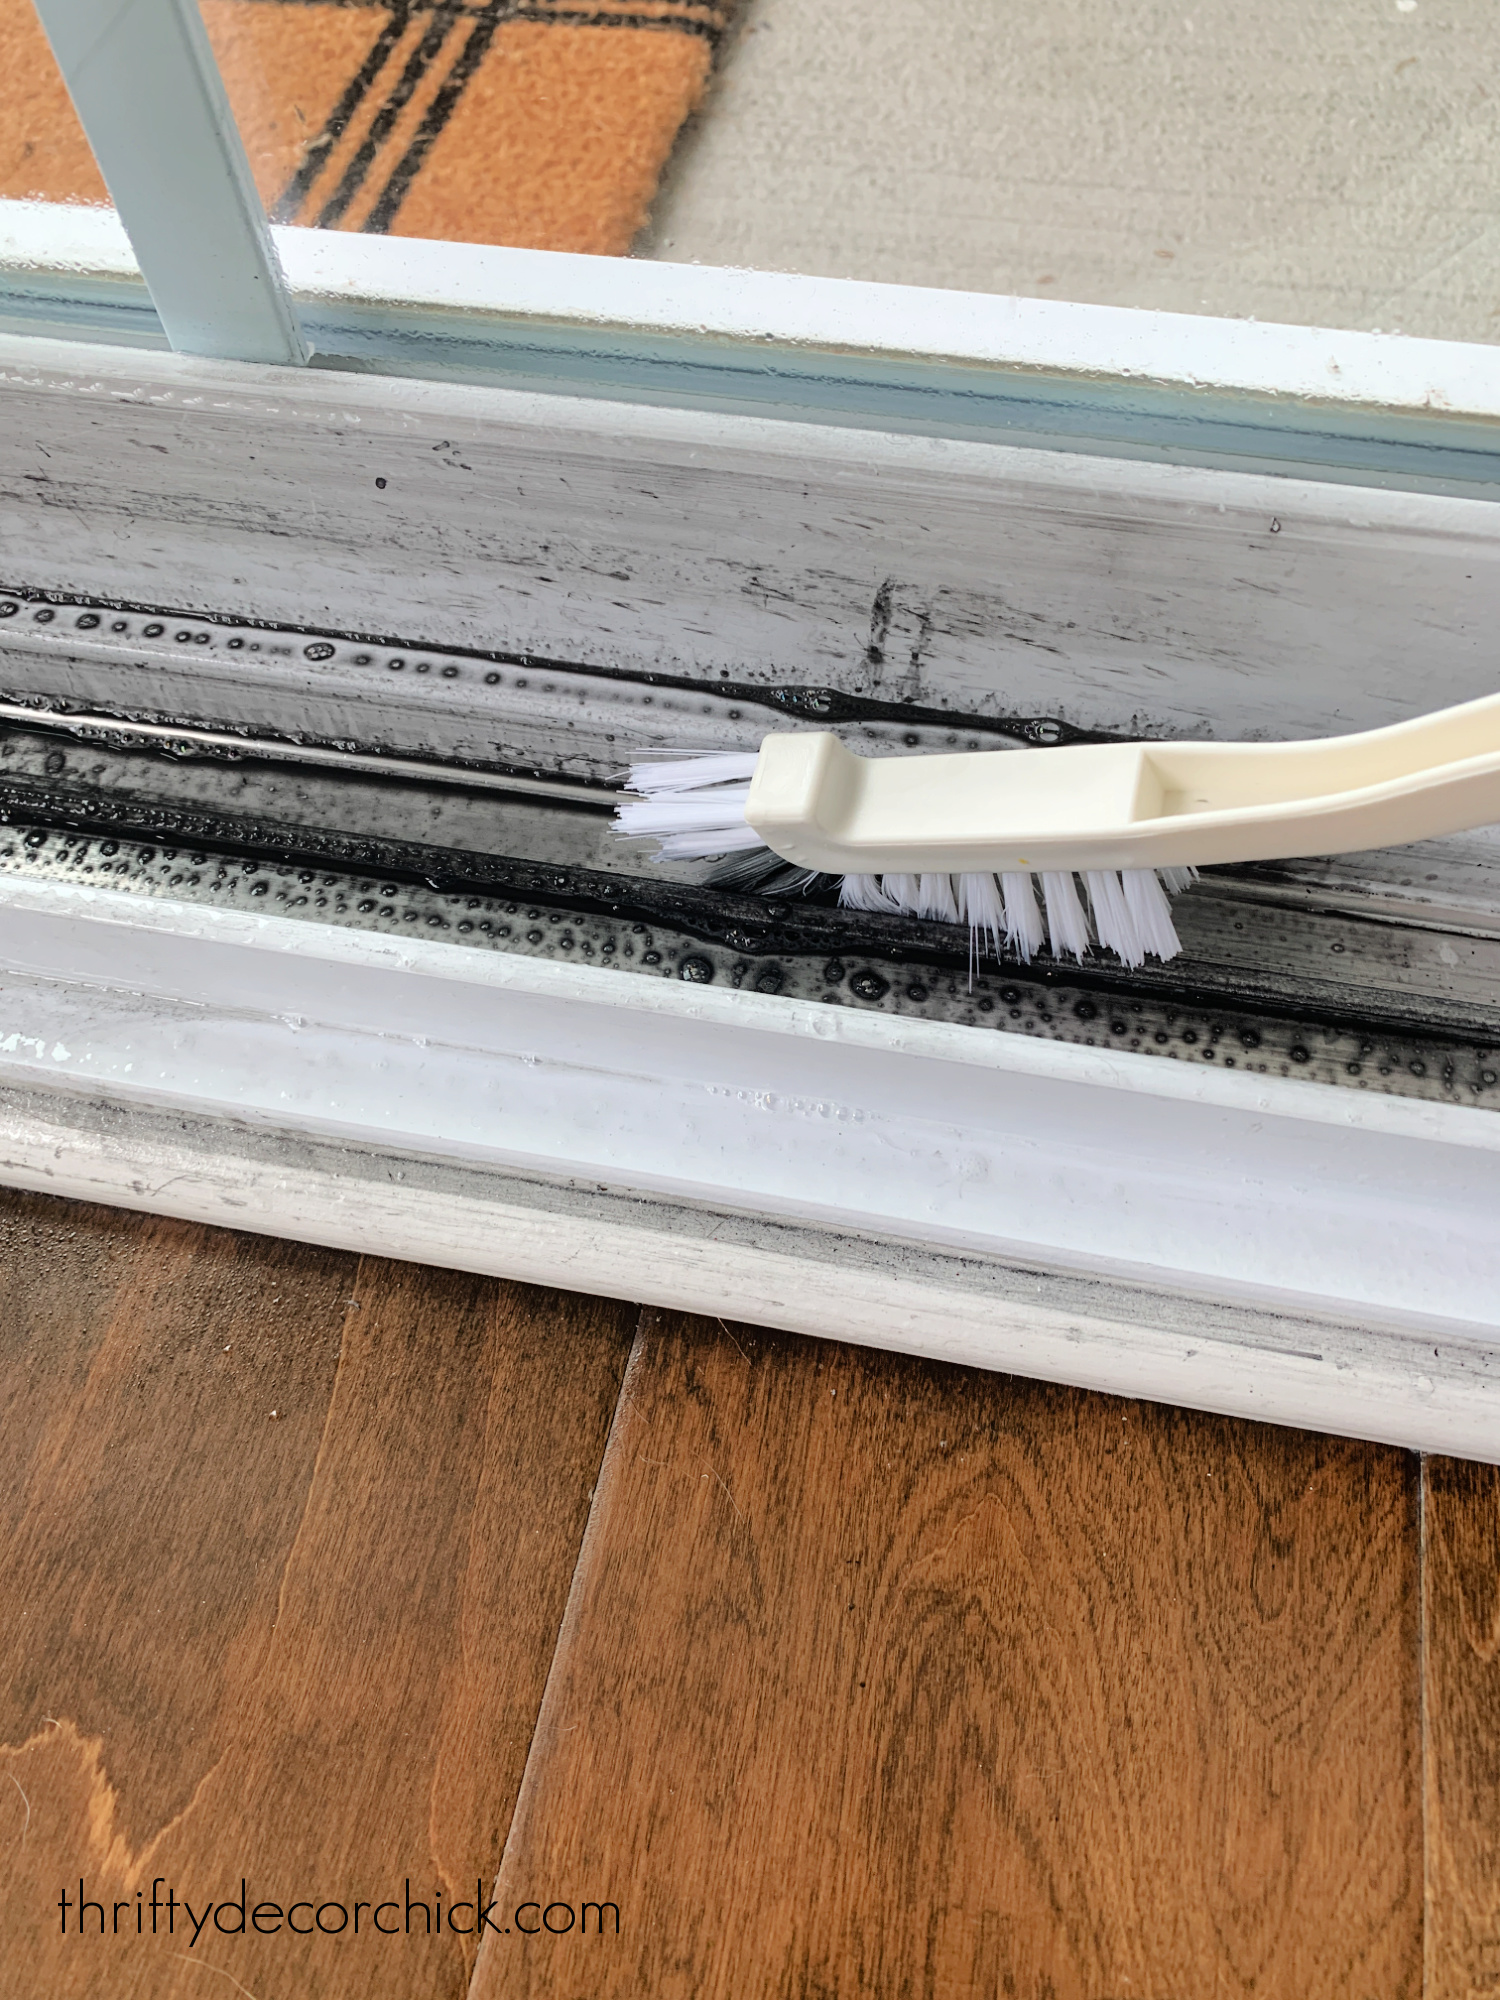 How to Clean Window Tracks Like a Pro In No Time Flat